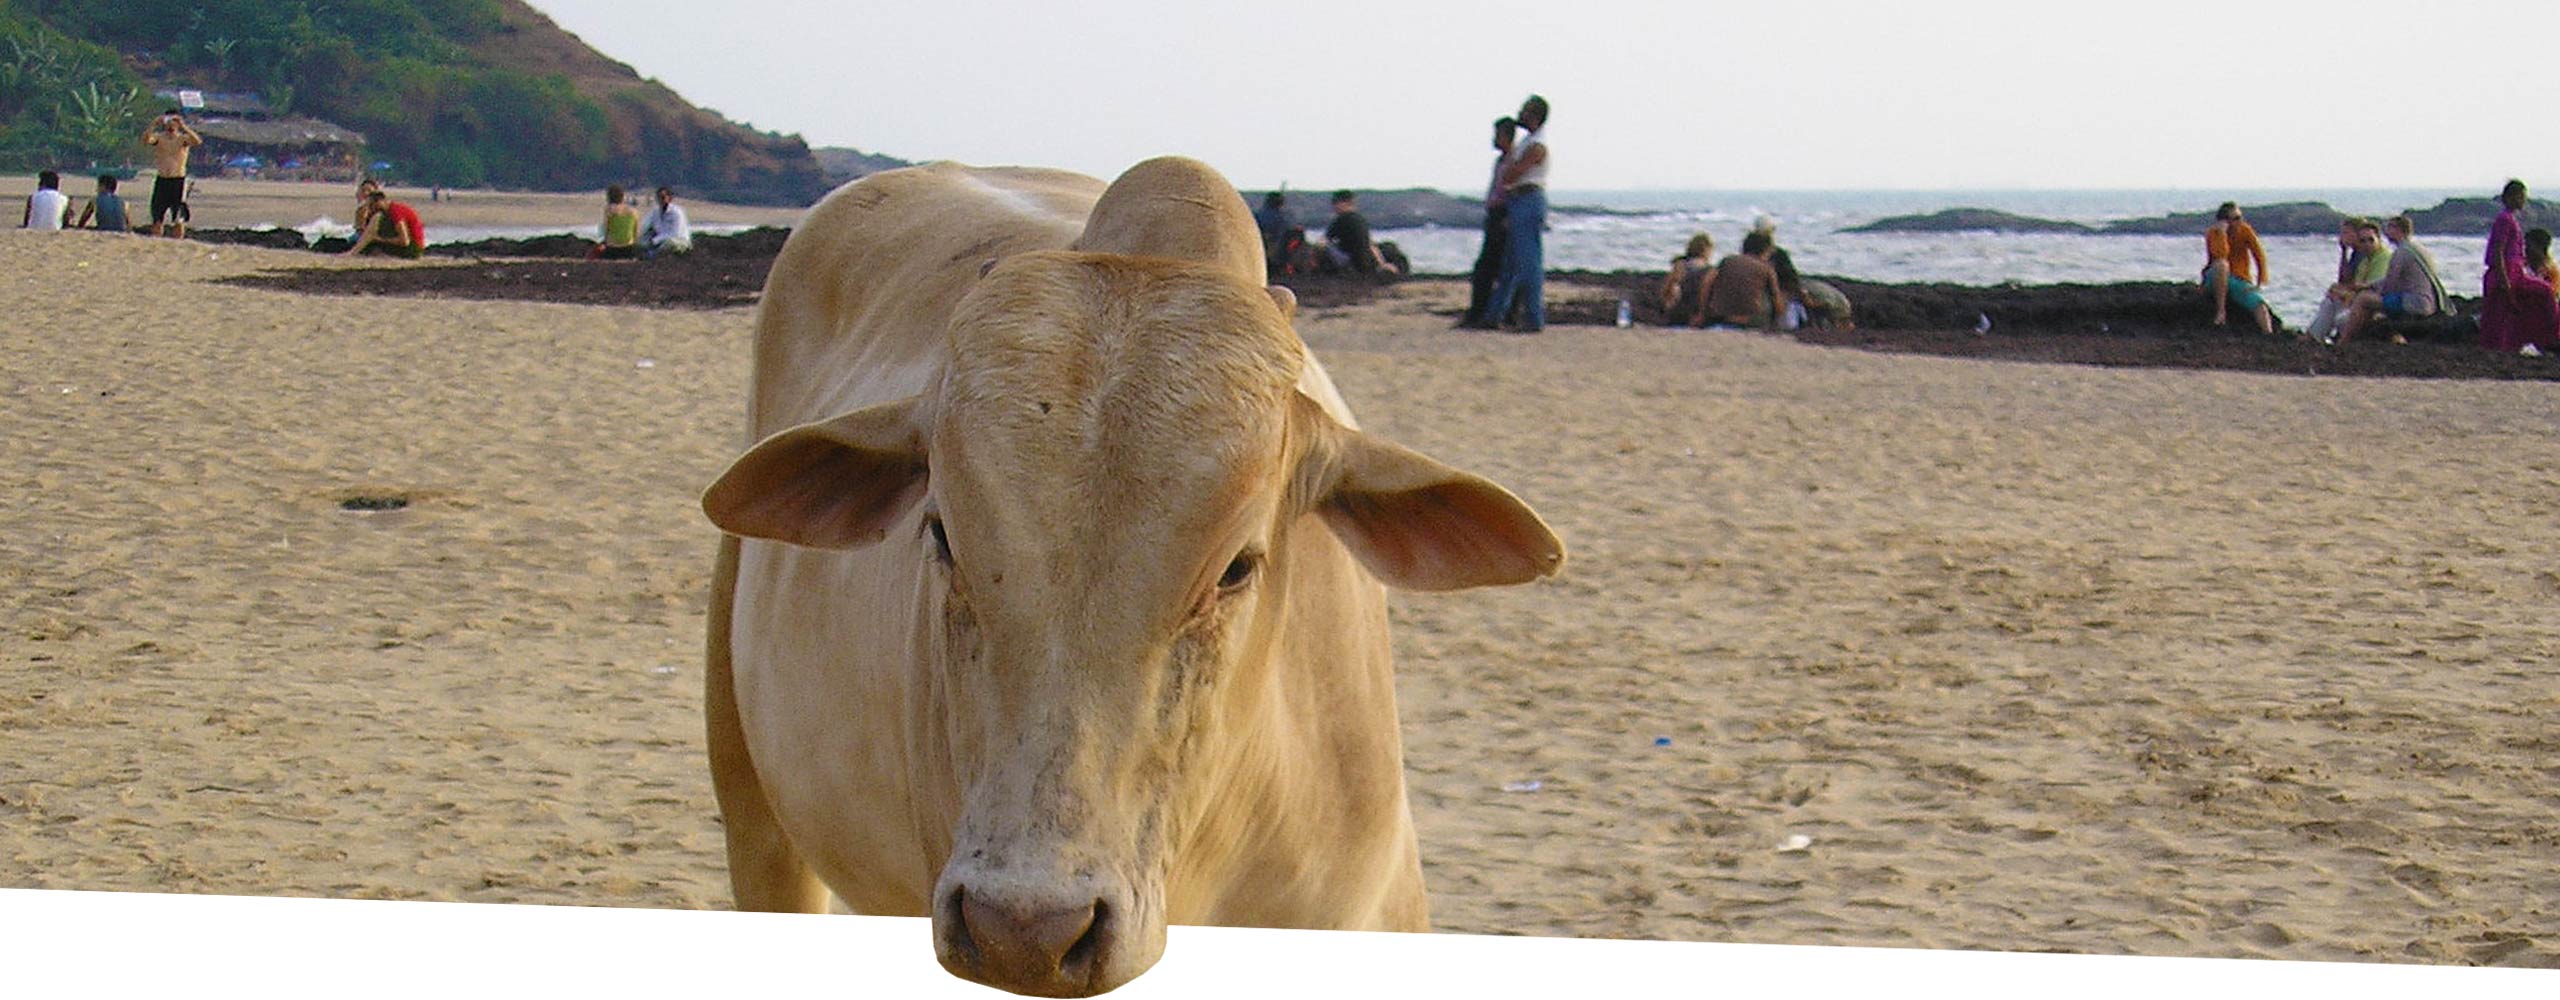 Cow on a beach in India